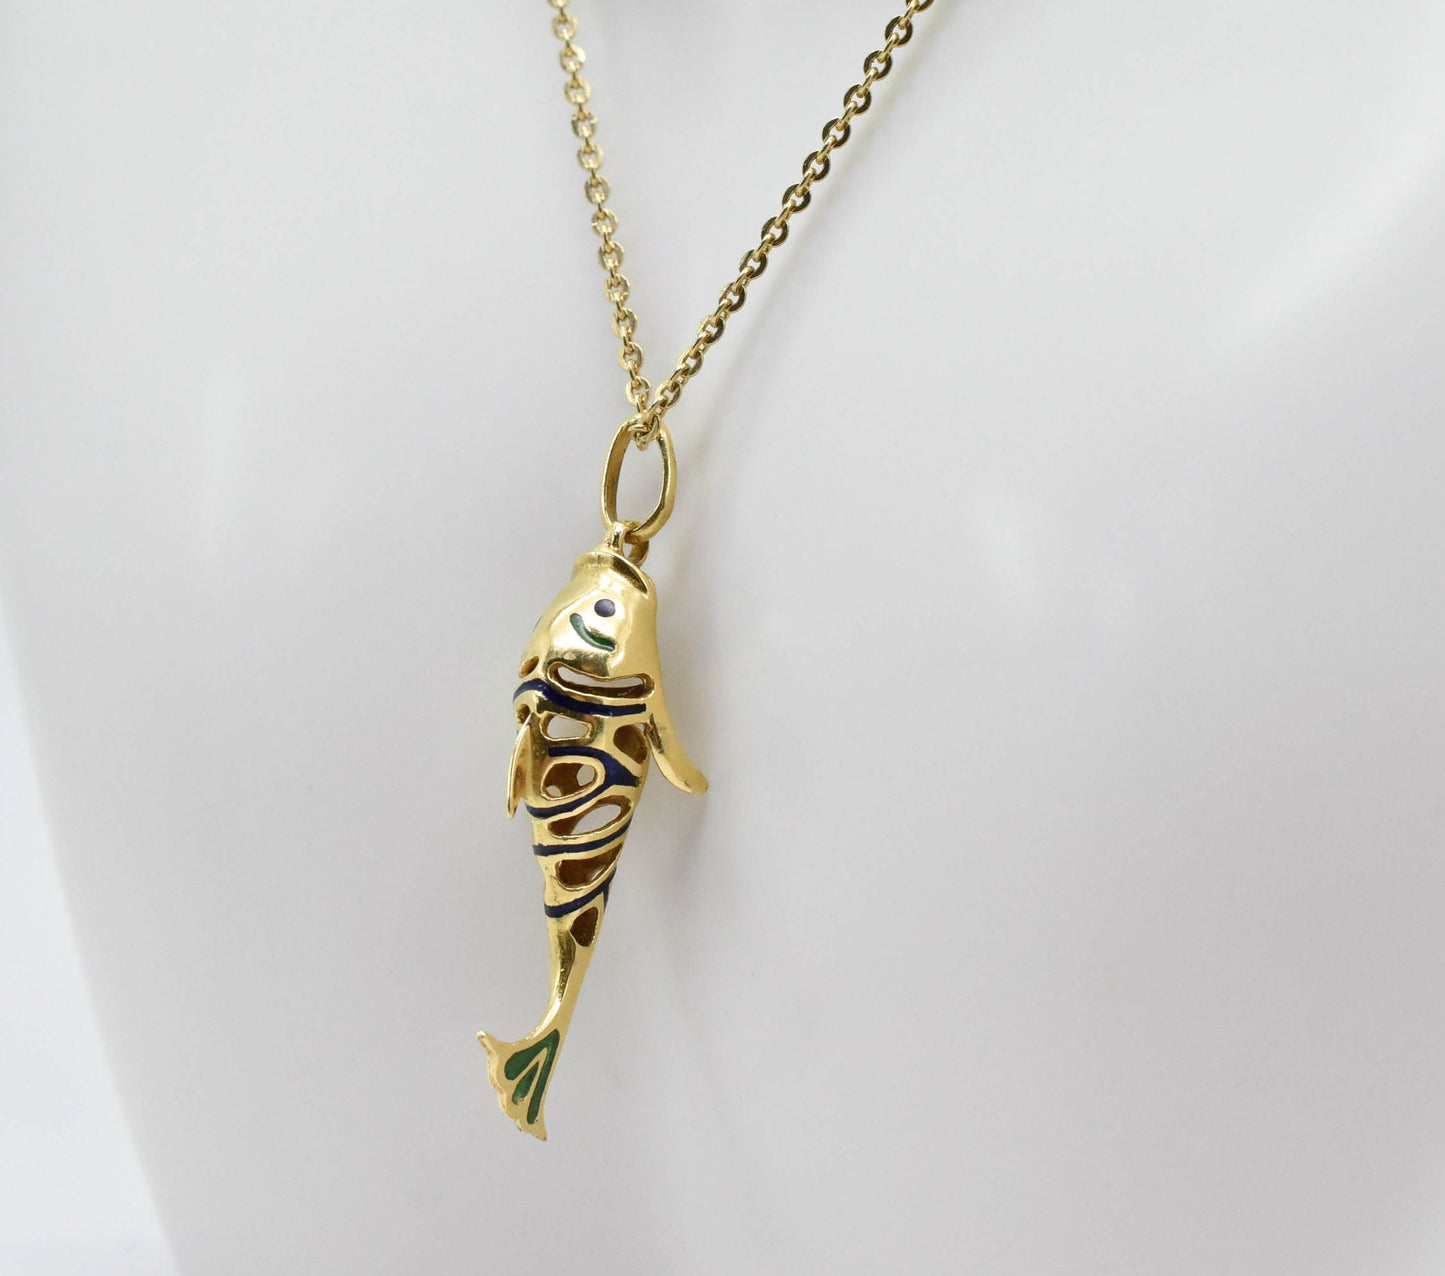 Chimera Oro 18k Yellow Gold Blue & Green Enamel Fish Necklace, 20 inches - 9.0g